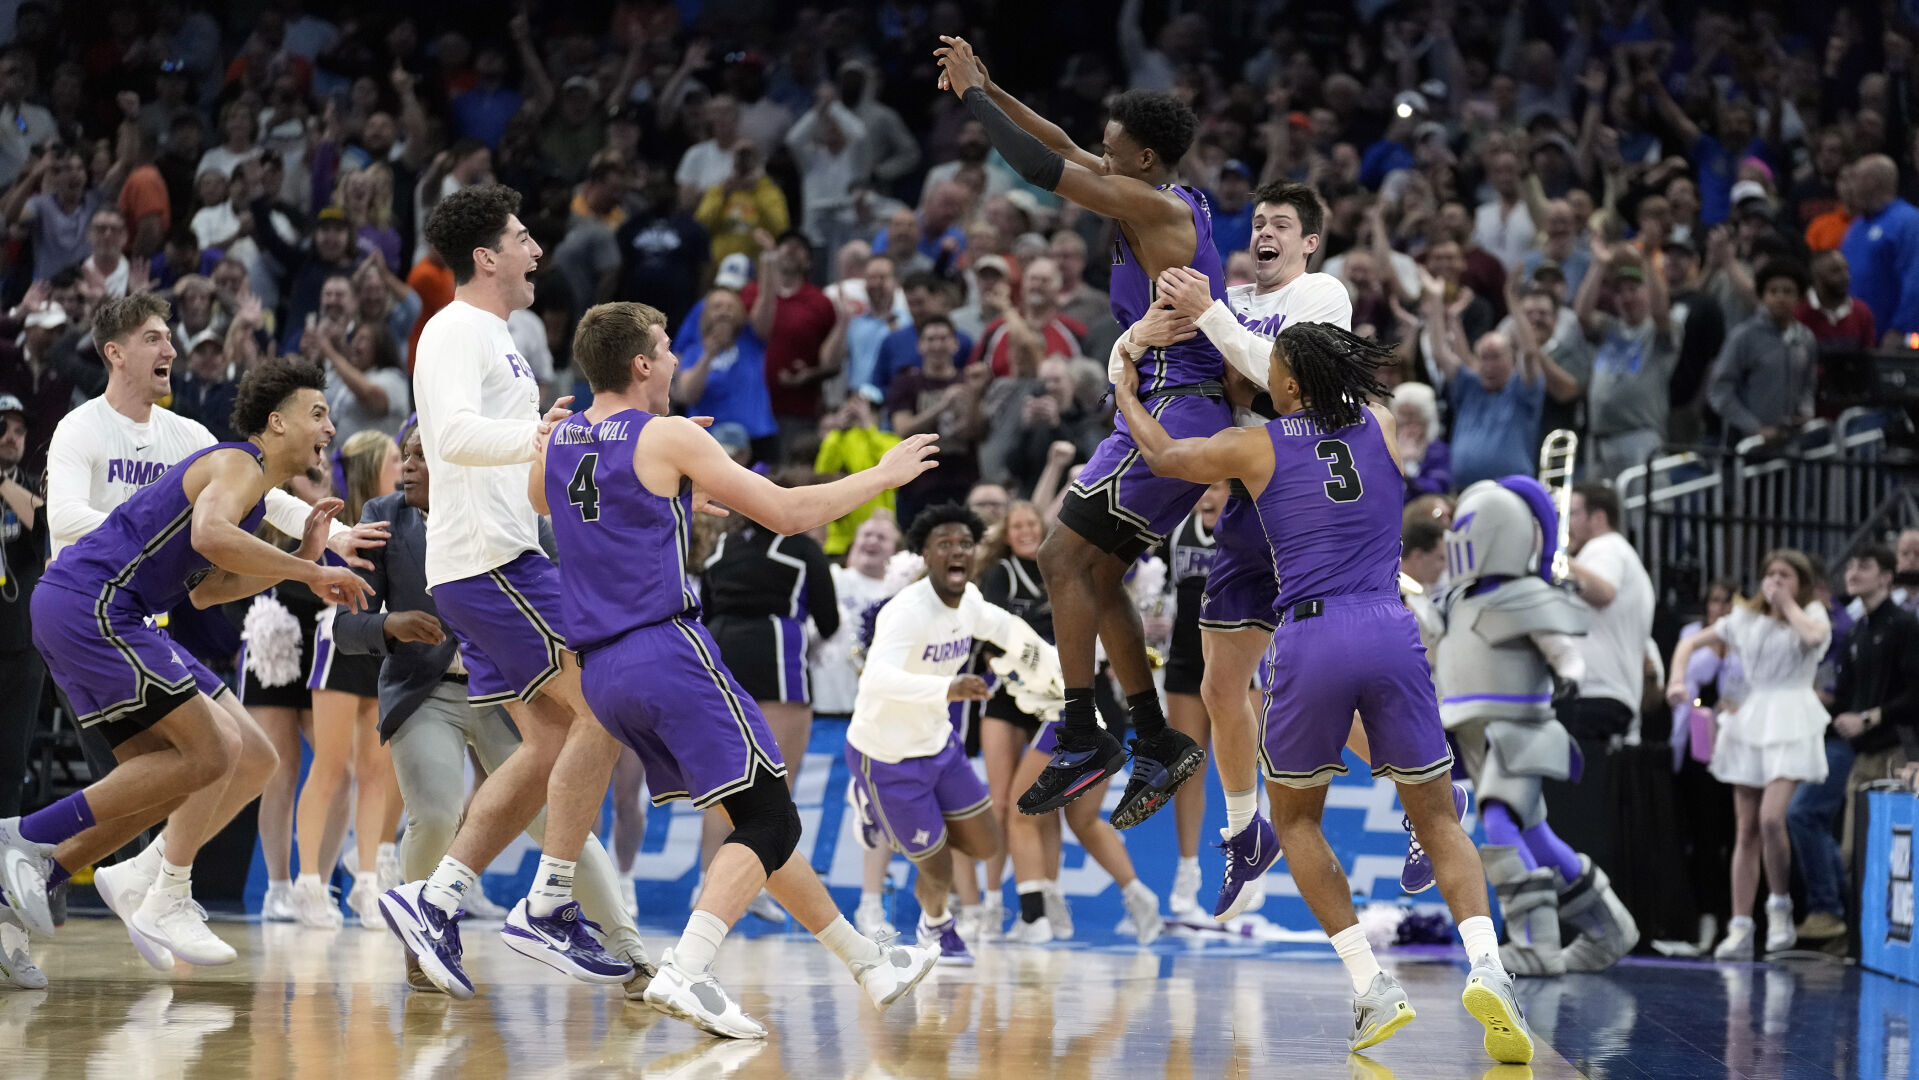 March Madness Upset Alerts: High Seeds at Risk in the NCAA Tournament